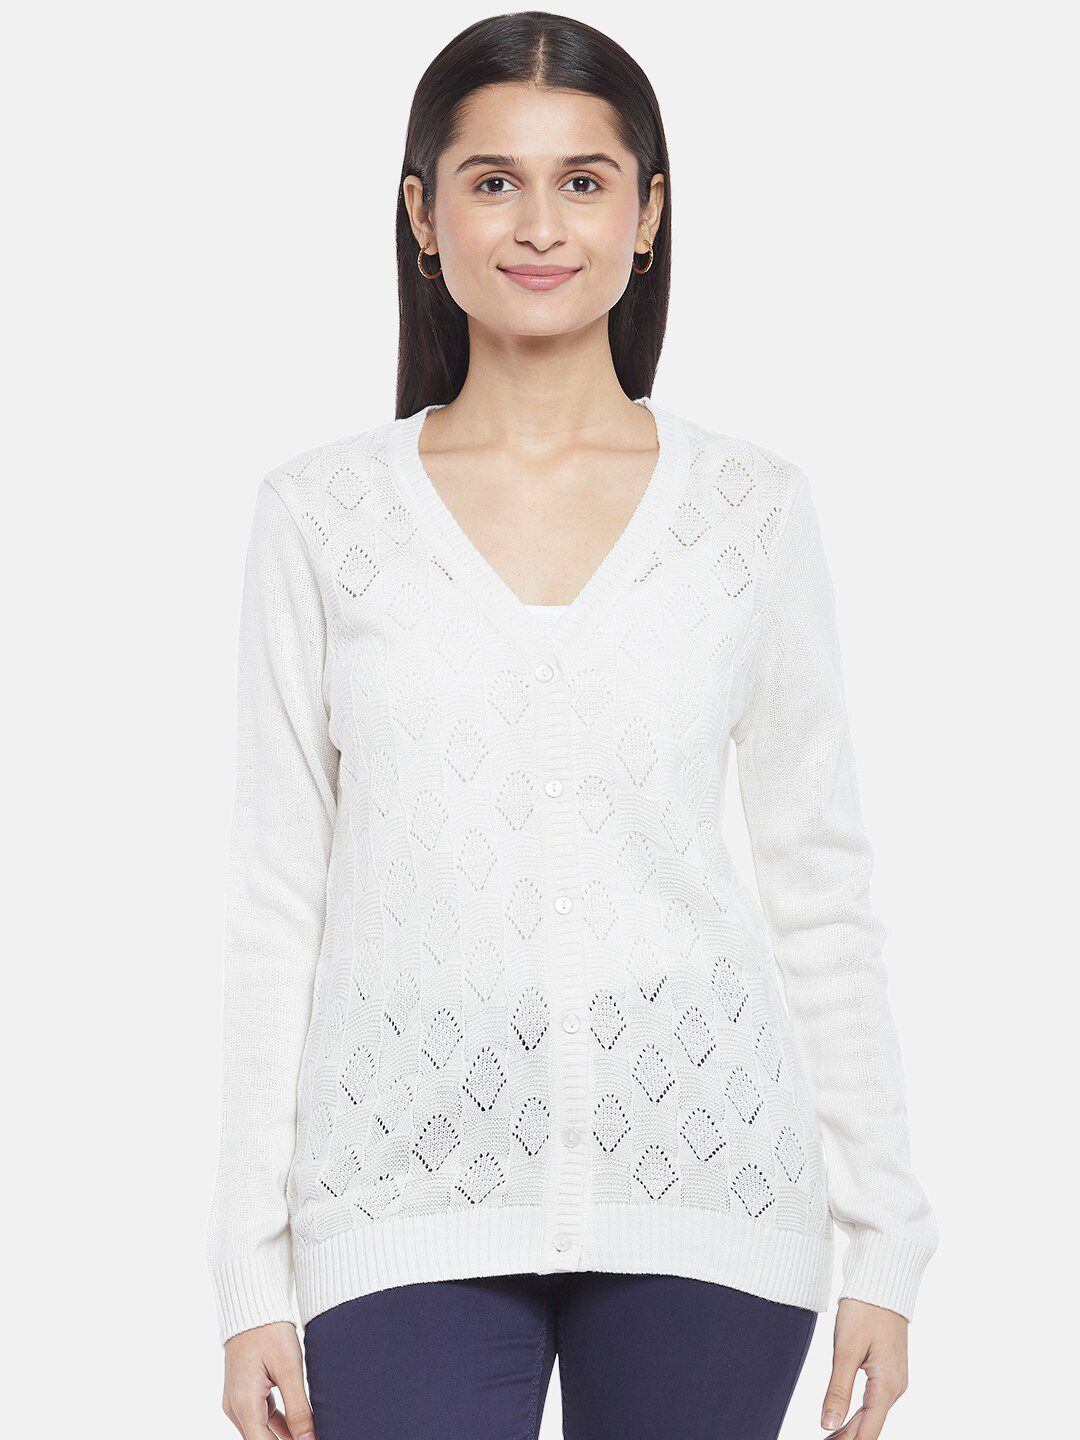 Honey by Pantaloons Women Off White Cardigan Price in India